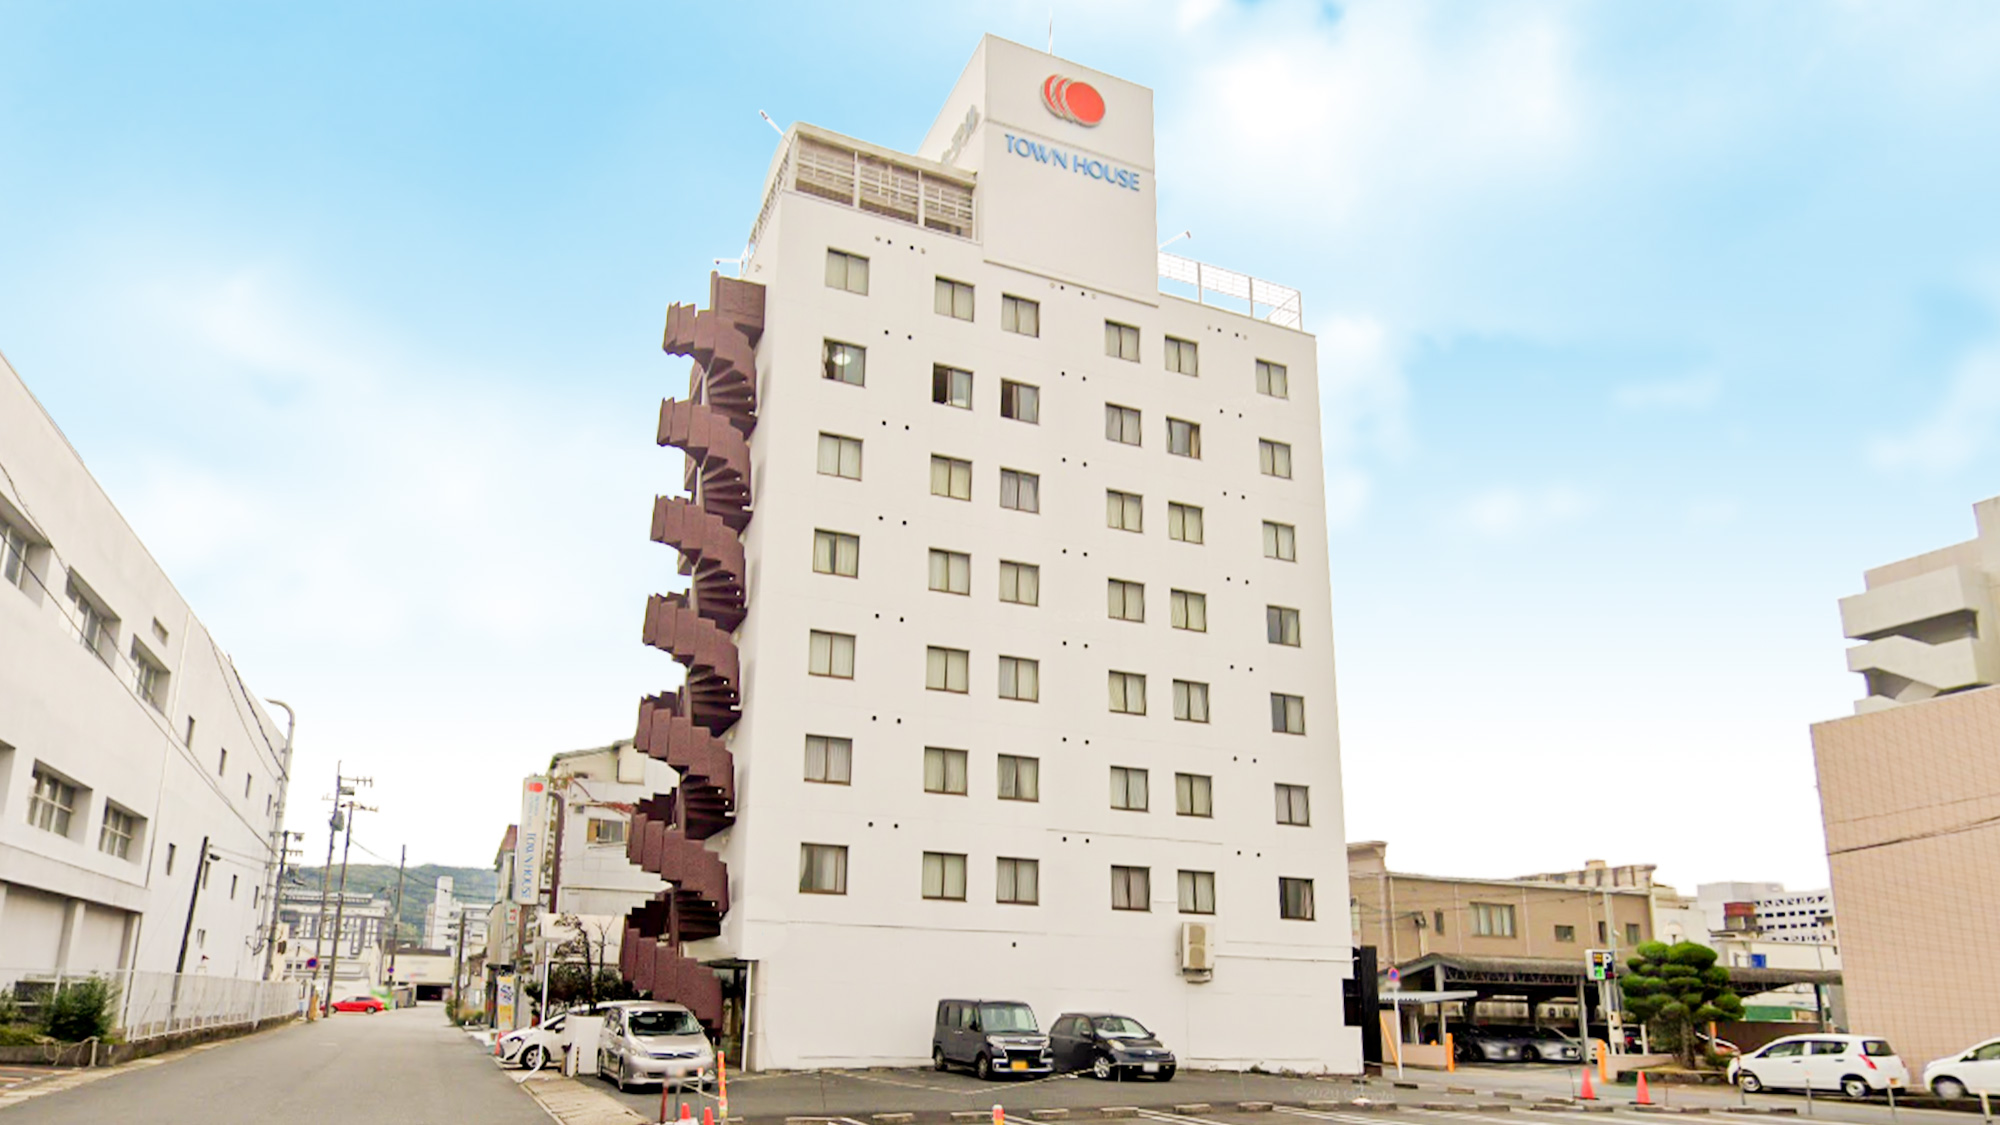 Tsuyama Central Hotel Town House (BBH Hotel Group)